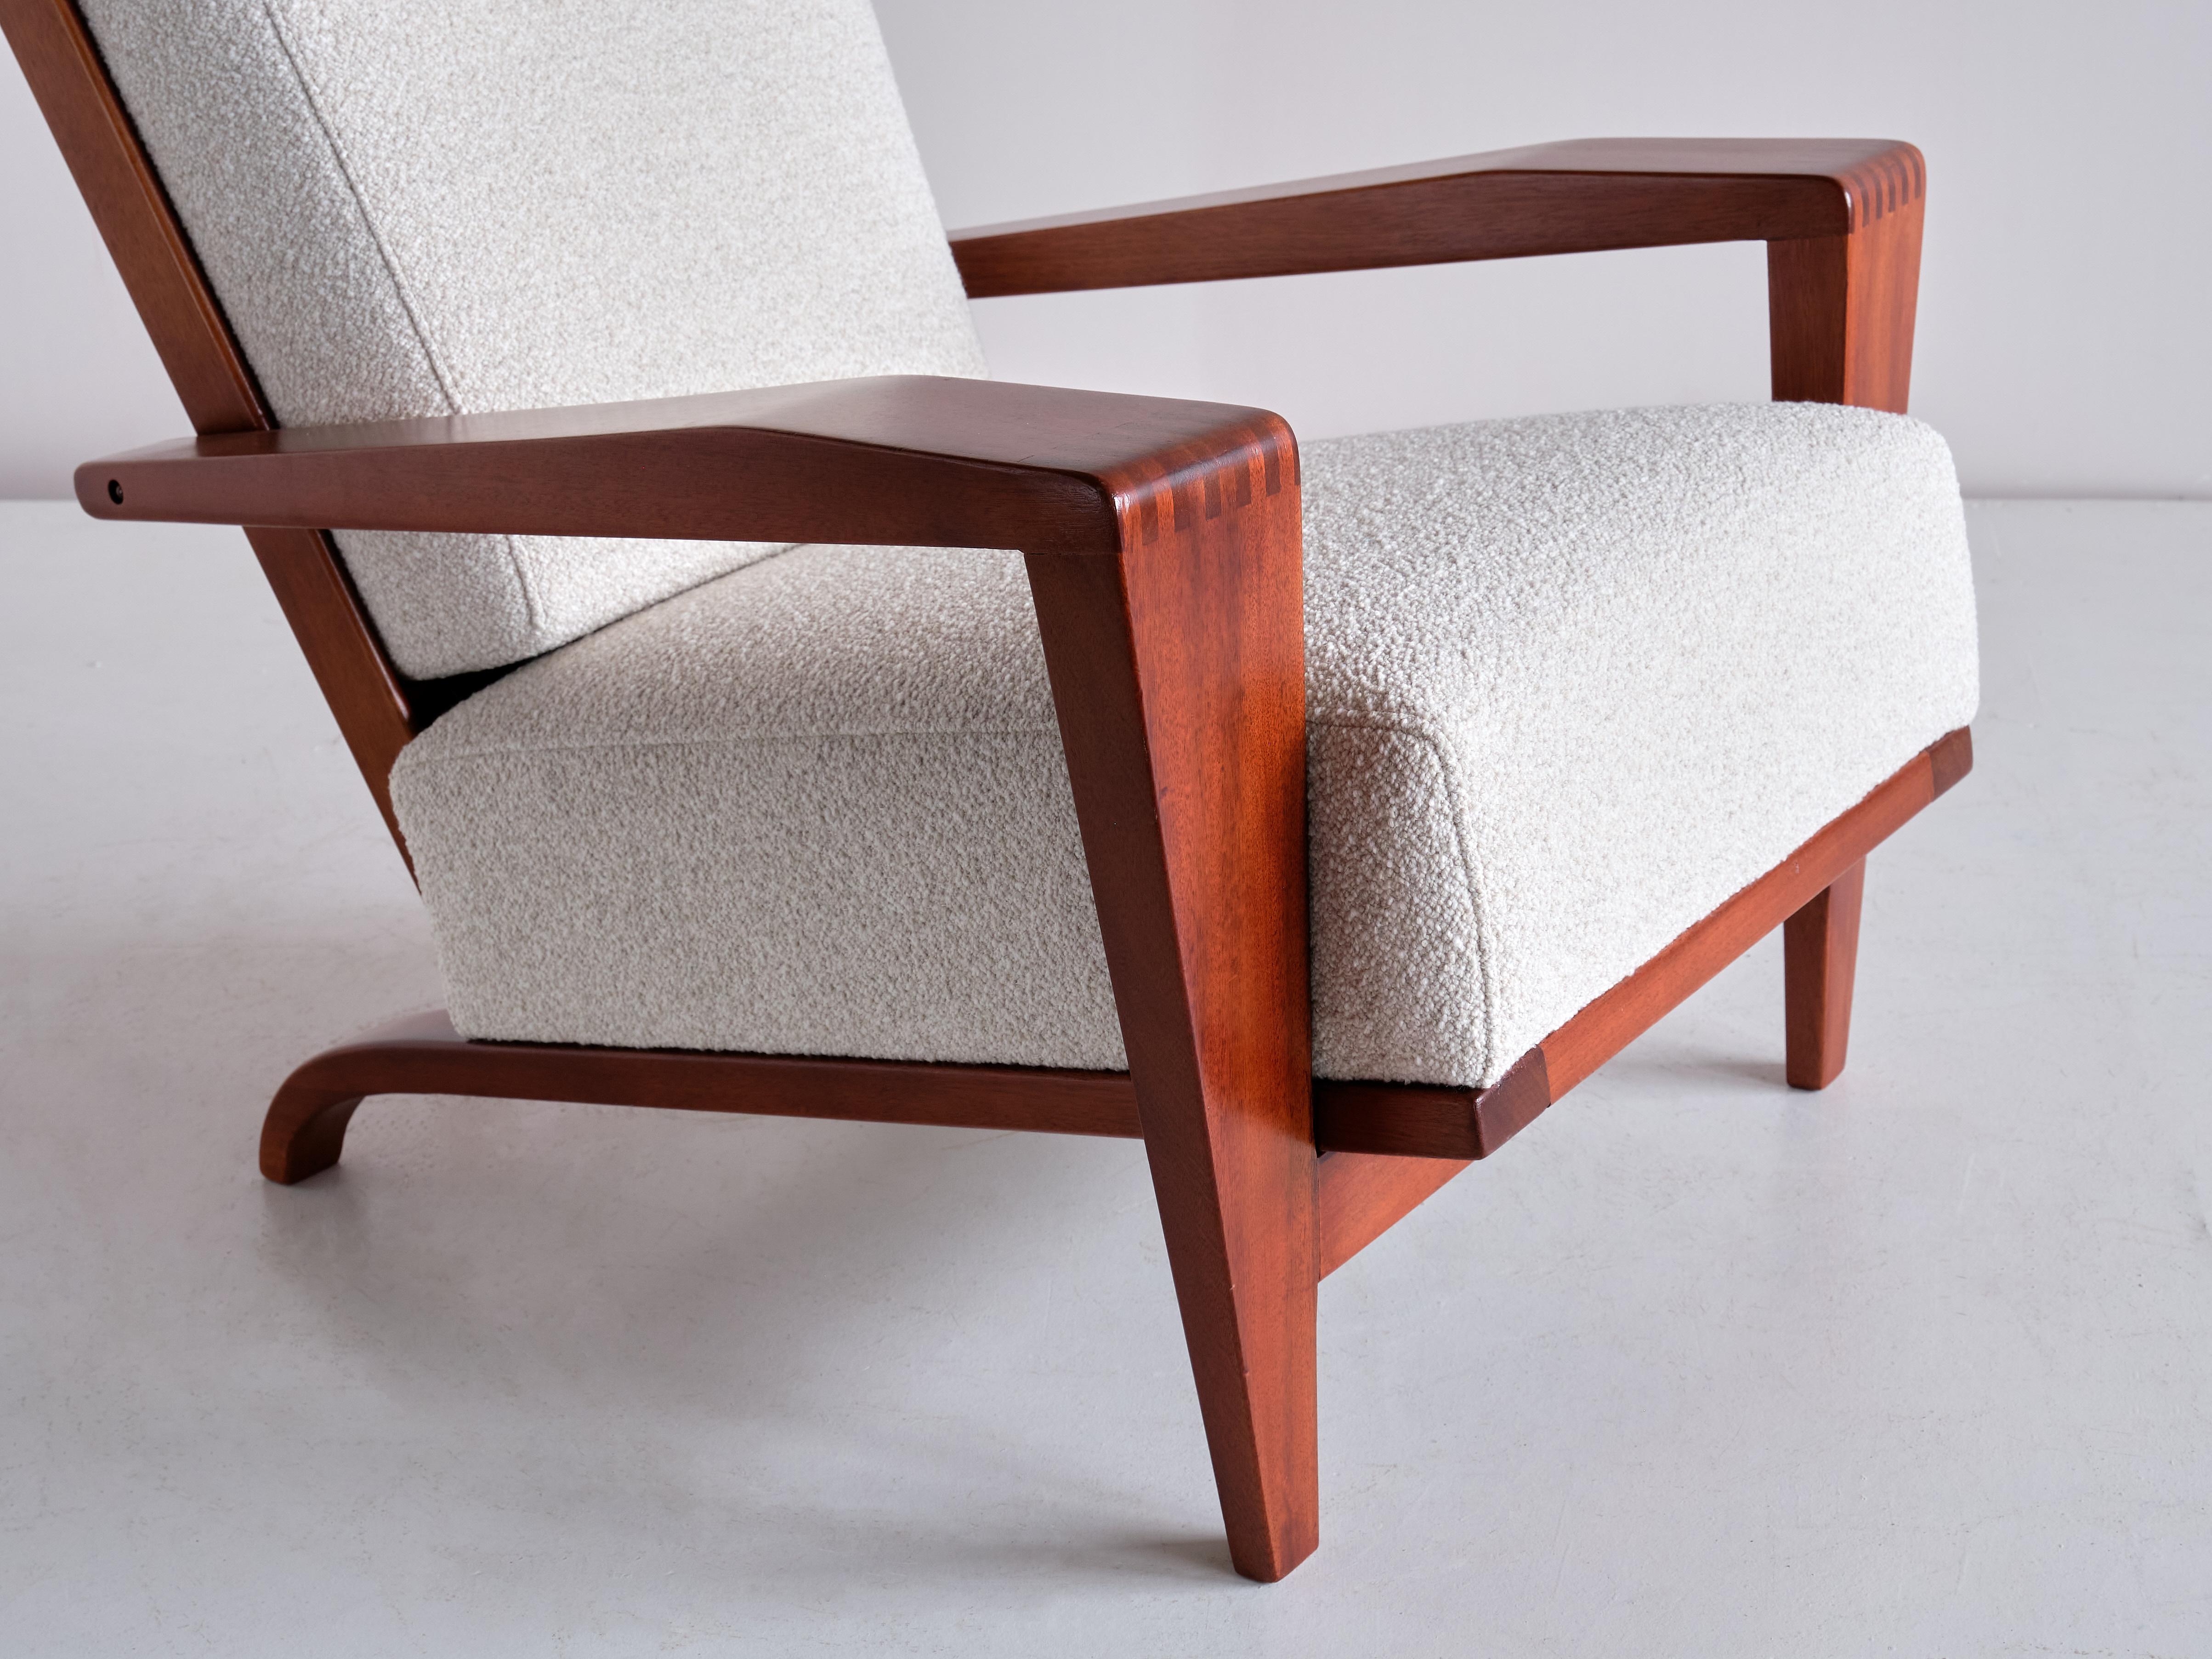 Pair of André Sornay Armchairs in Sapele Mahogany and Bouclé, France, 1950s For Sale 7